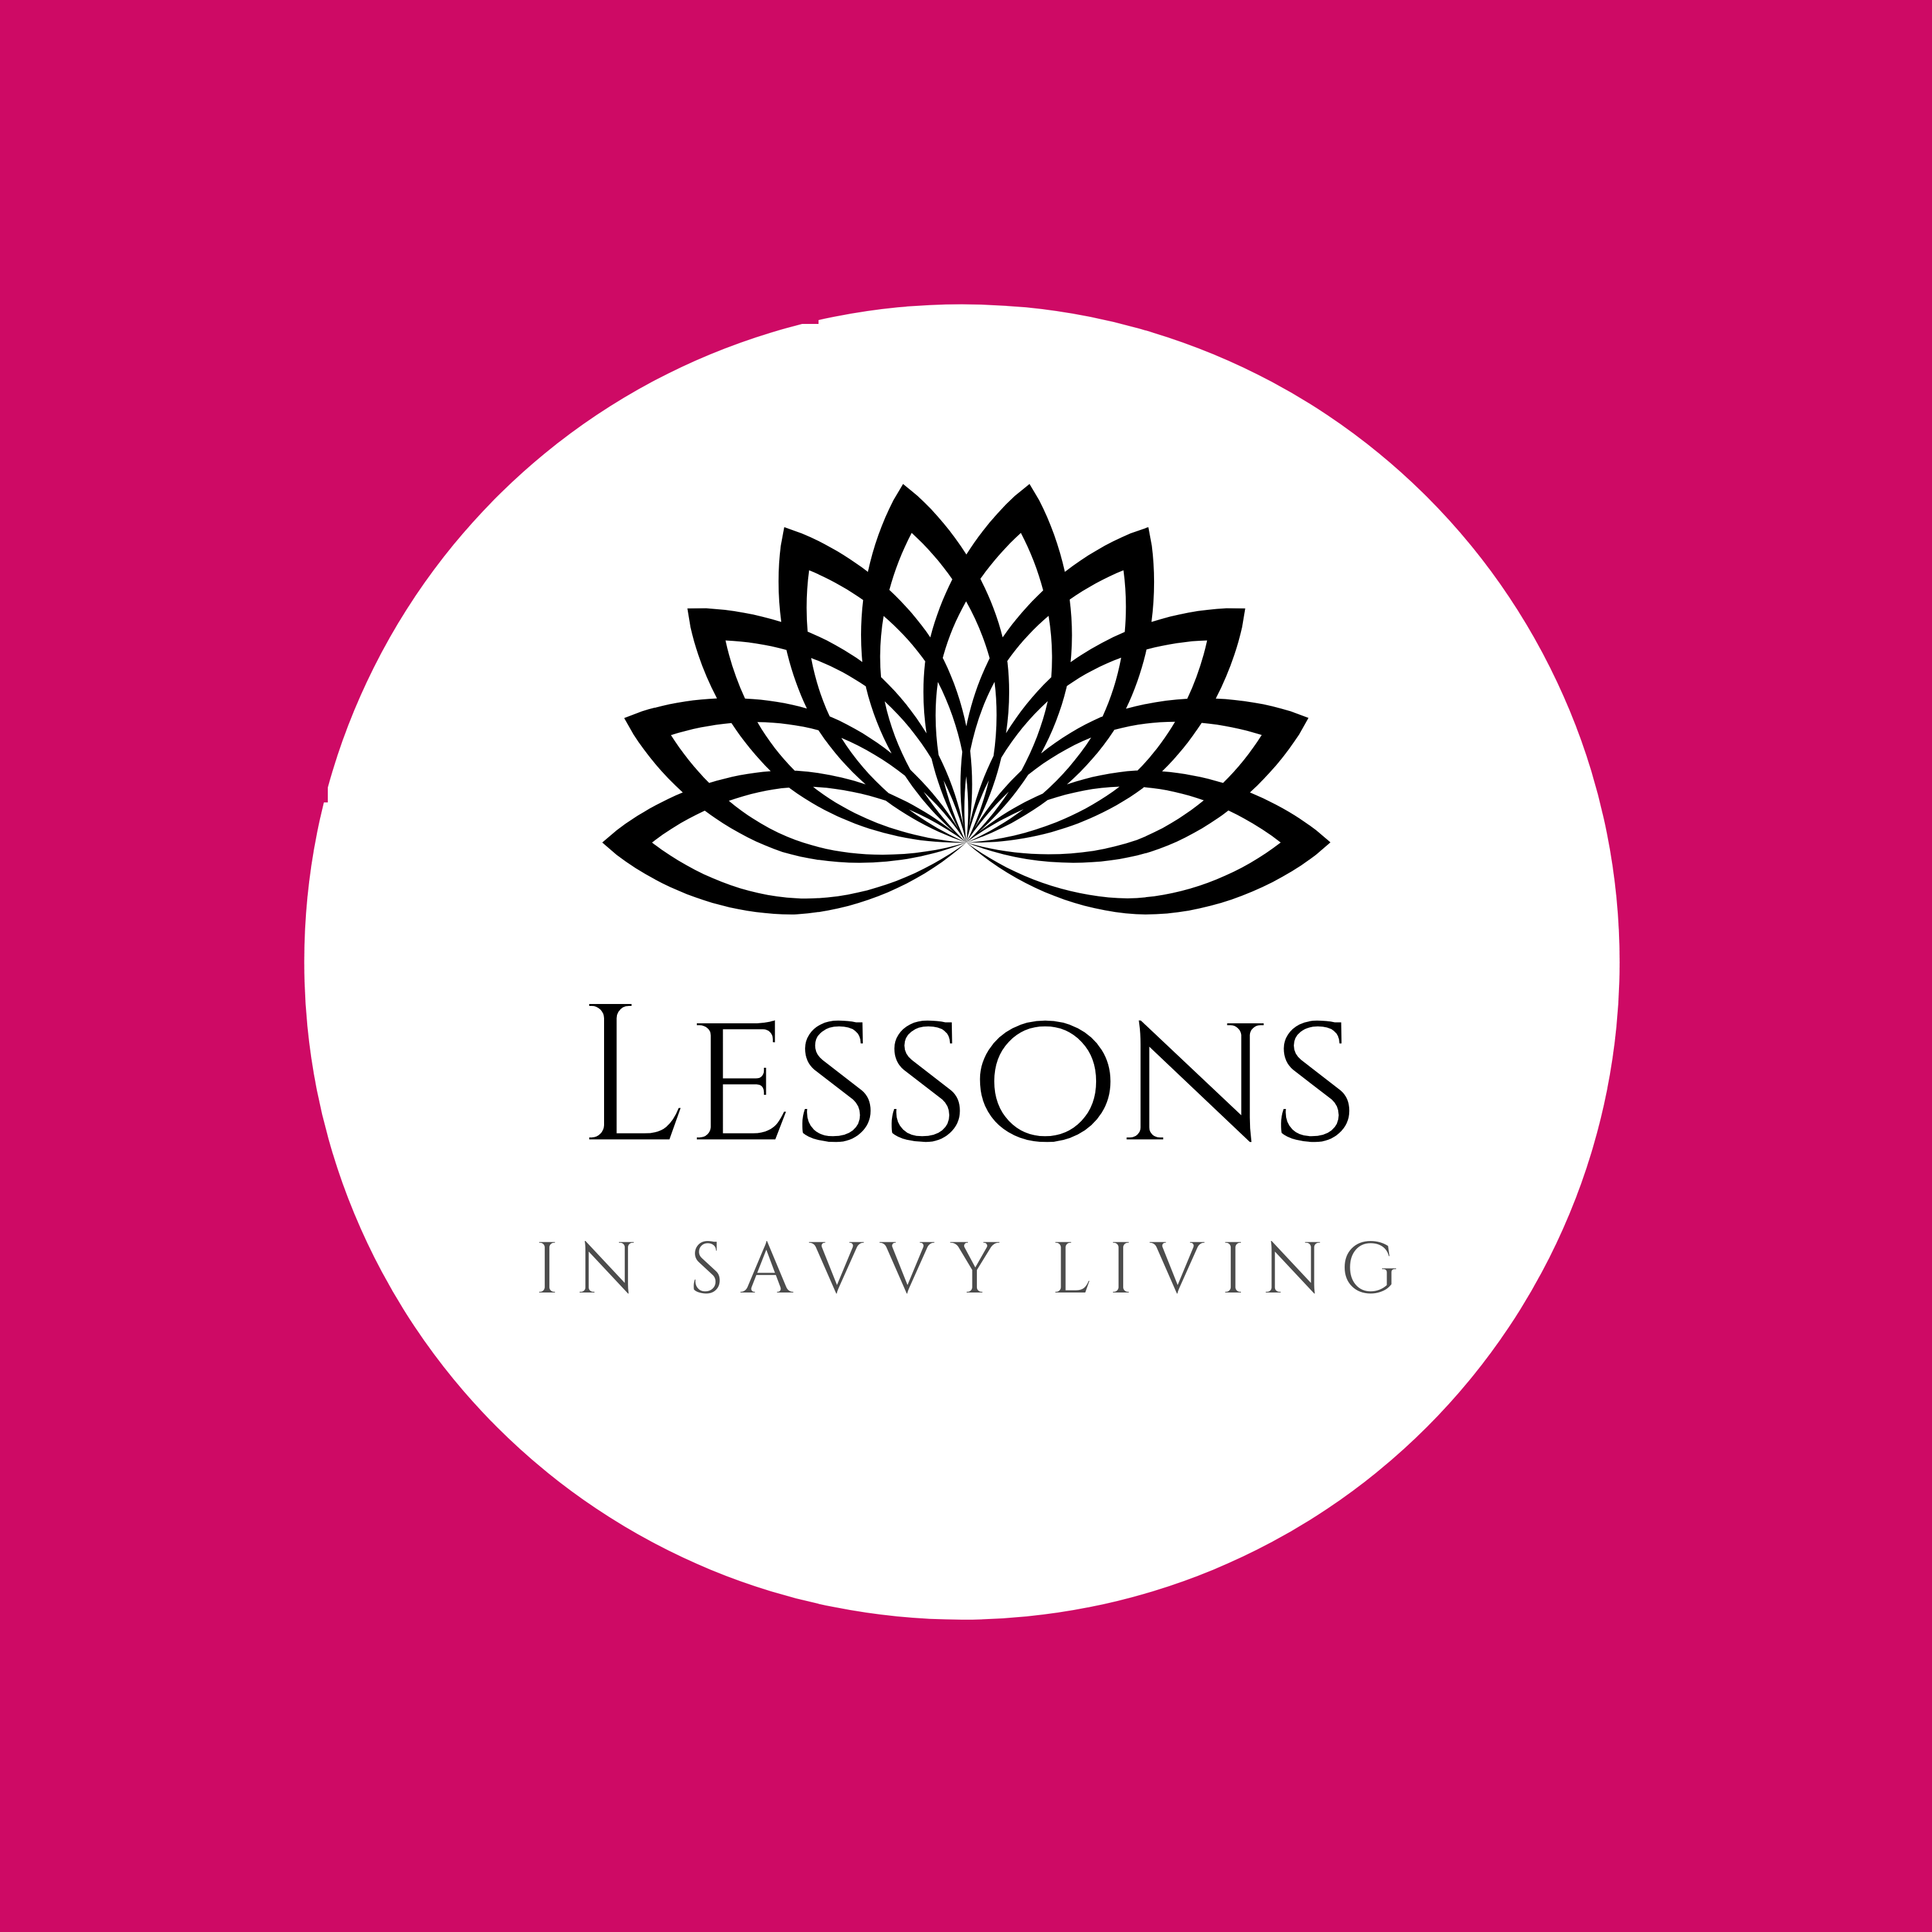 Lessons in Savvy Living